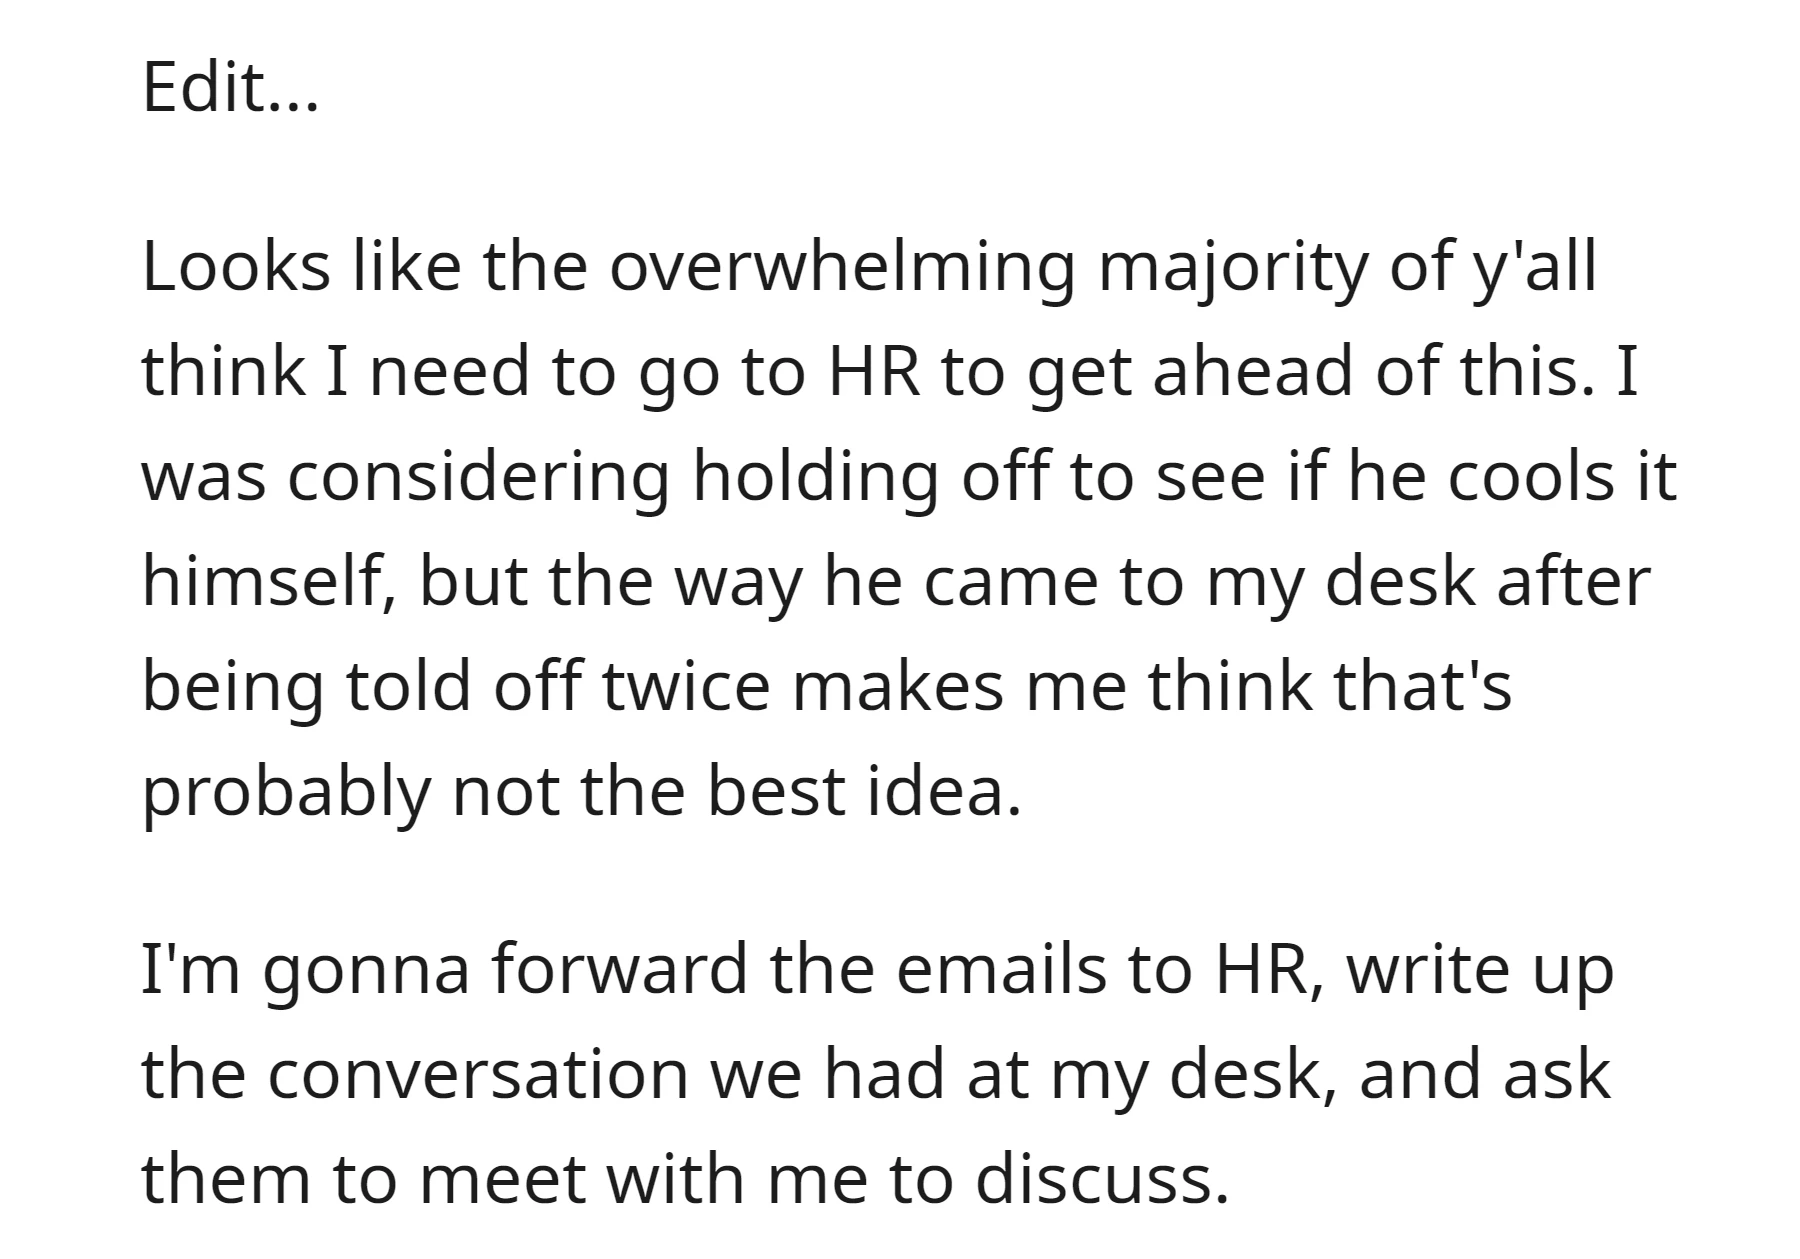 OP decided to proactively approach HR, forwarding the emails and detailing the conversation